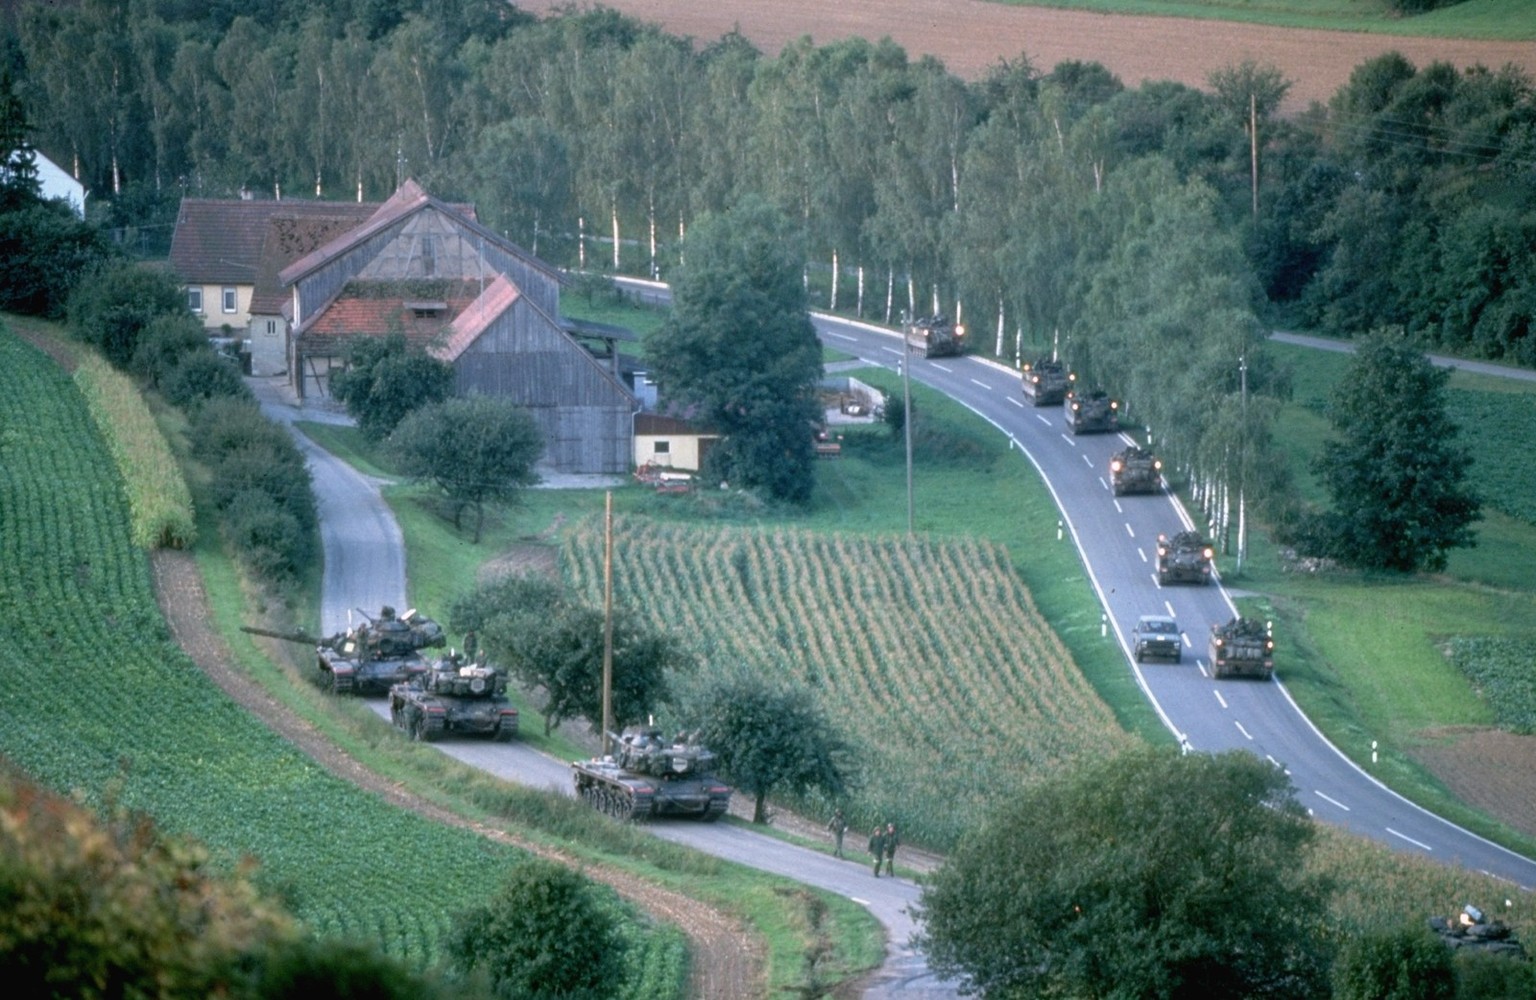 Aerial of US tanks rolling along roads in countryside during NATO Reforger Maneuvers.

Mark Meyer/The LIFE Picture Collection

Special Instructions: Premium. Please contact us for licensing use of thi ...